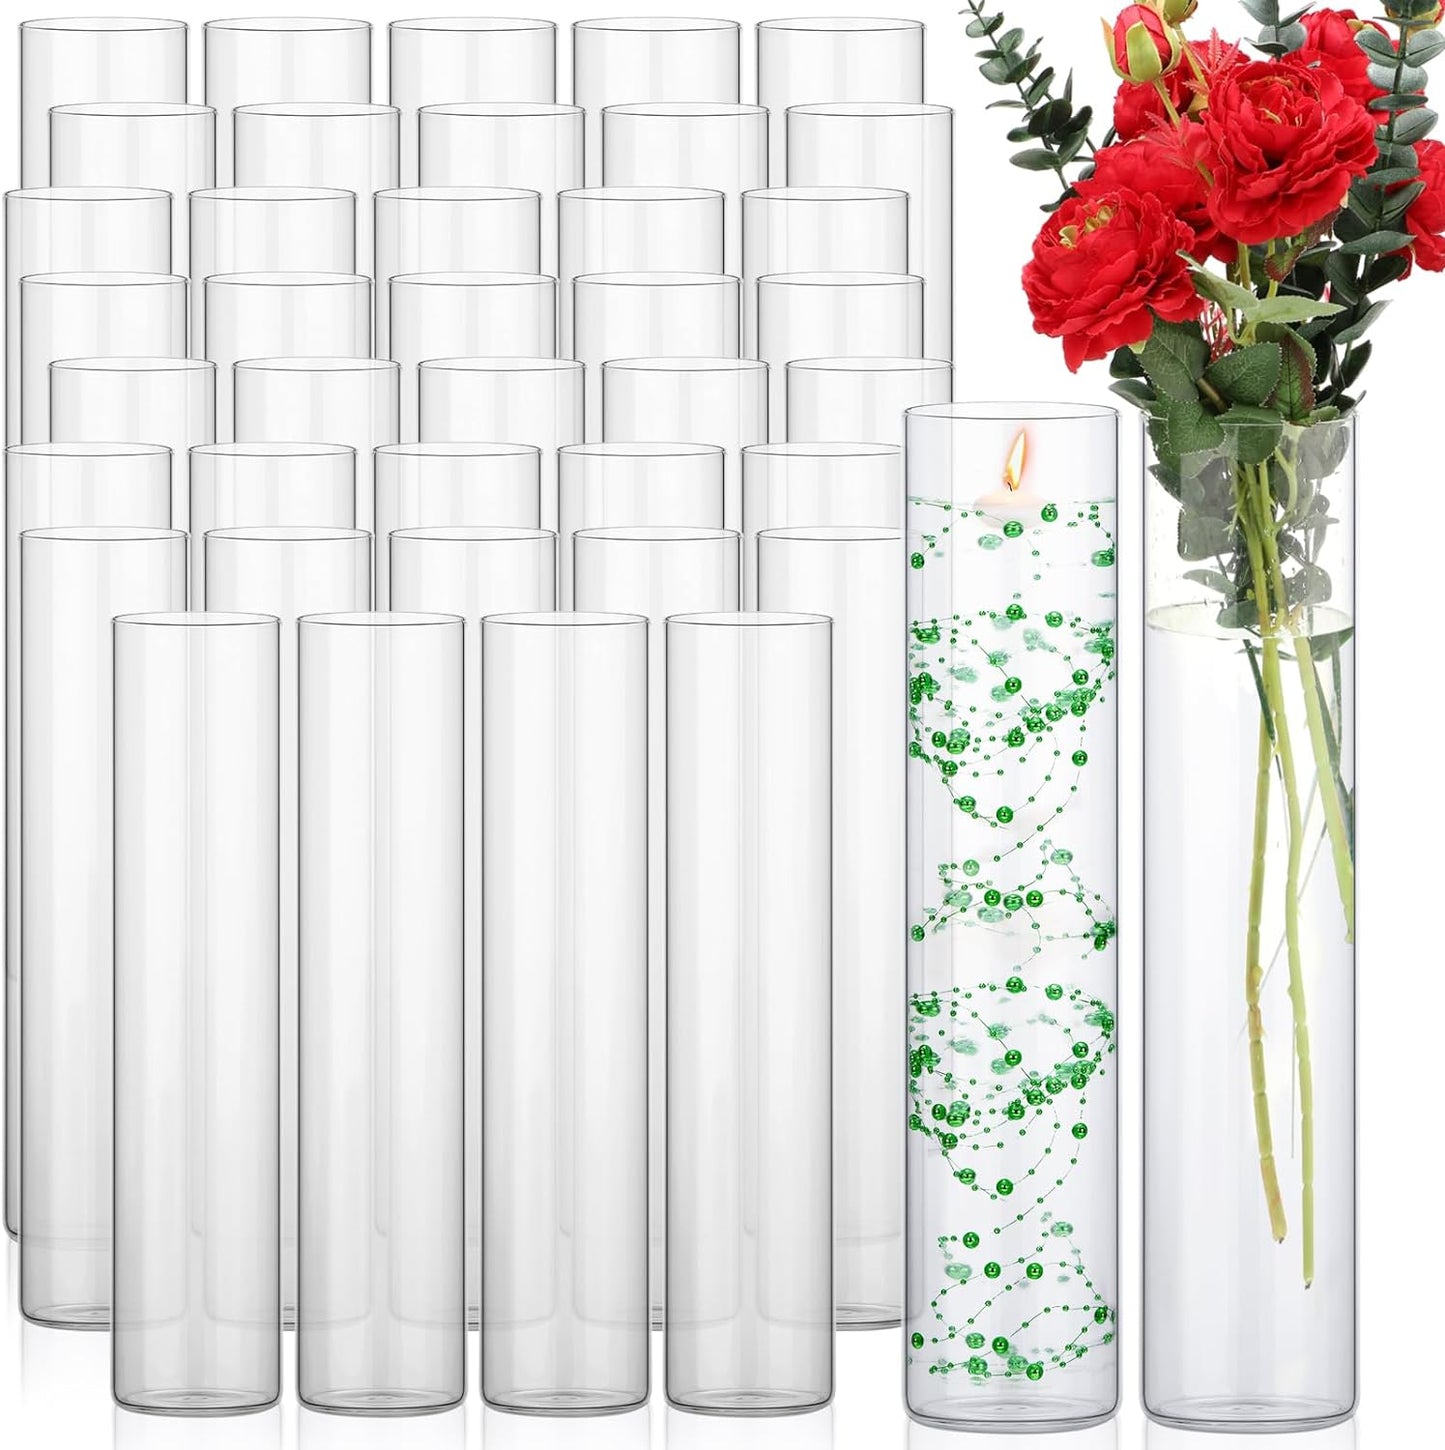 Yaomiao 36 Pcs Glass Cylinder Vases for Centerpieces Bulk Clear Flower Vases Centerpiece Floating Candle Holders Glass Table Vases for Wedding Home Formal Dinners Decorations (16 x 3.35 Inch)